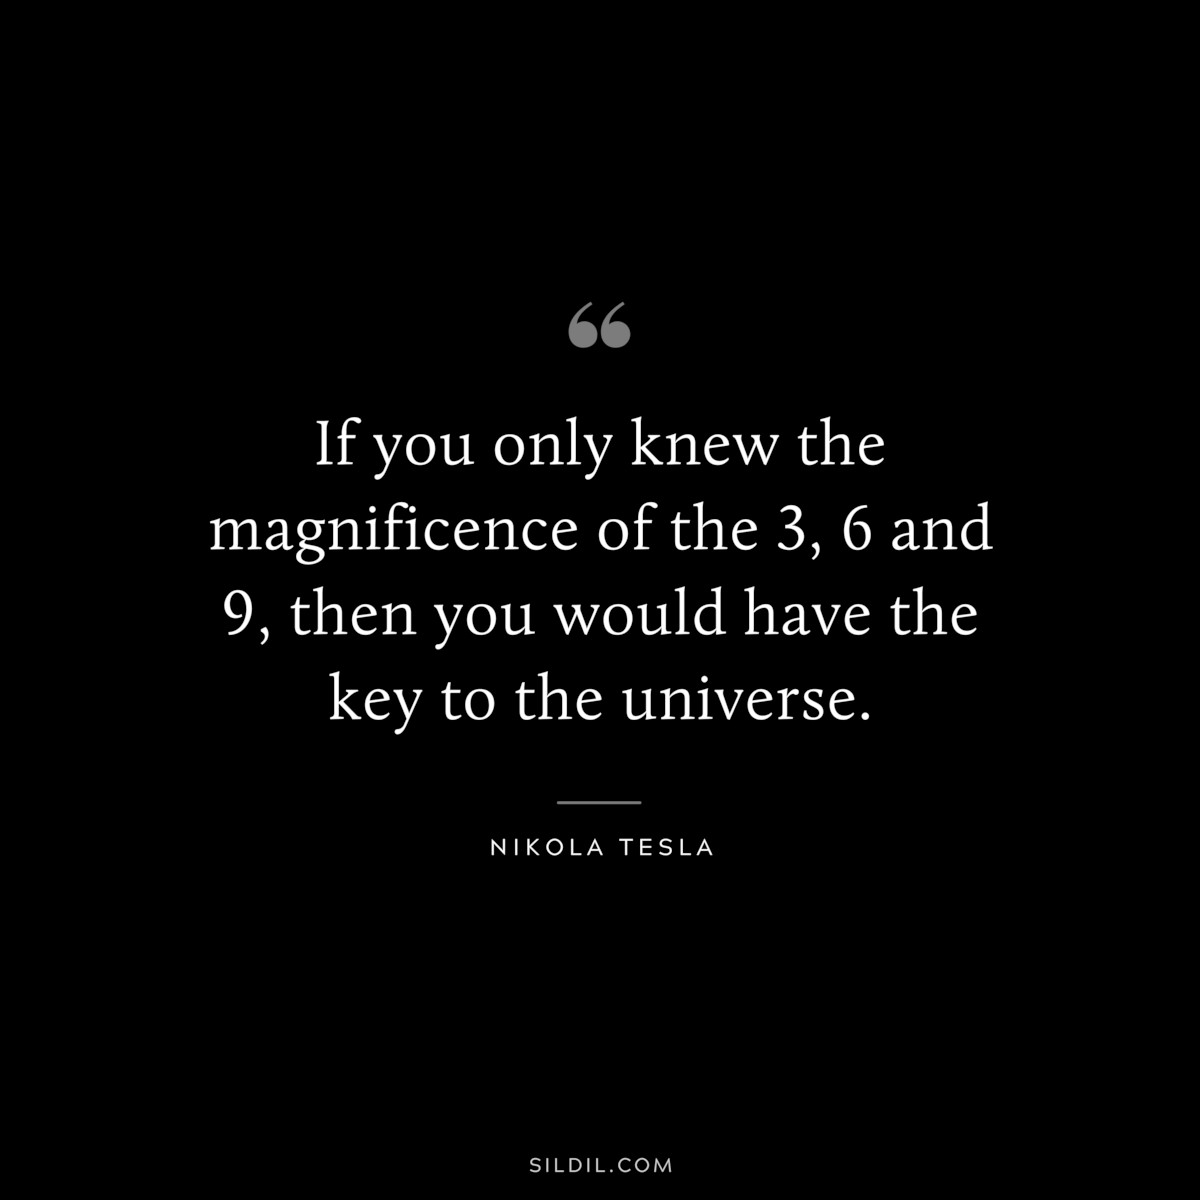 If you only knew the magnificence of the 3, 6 and 9, then you would have the key to the universe. ― Nikola Tesla